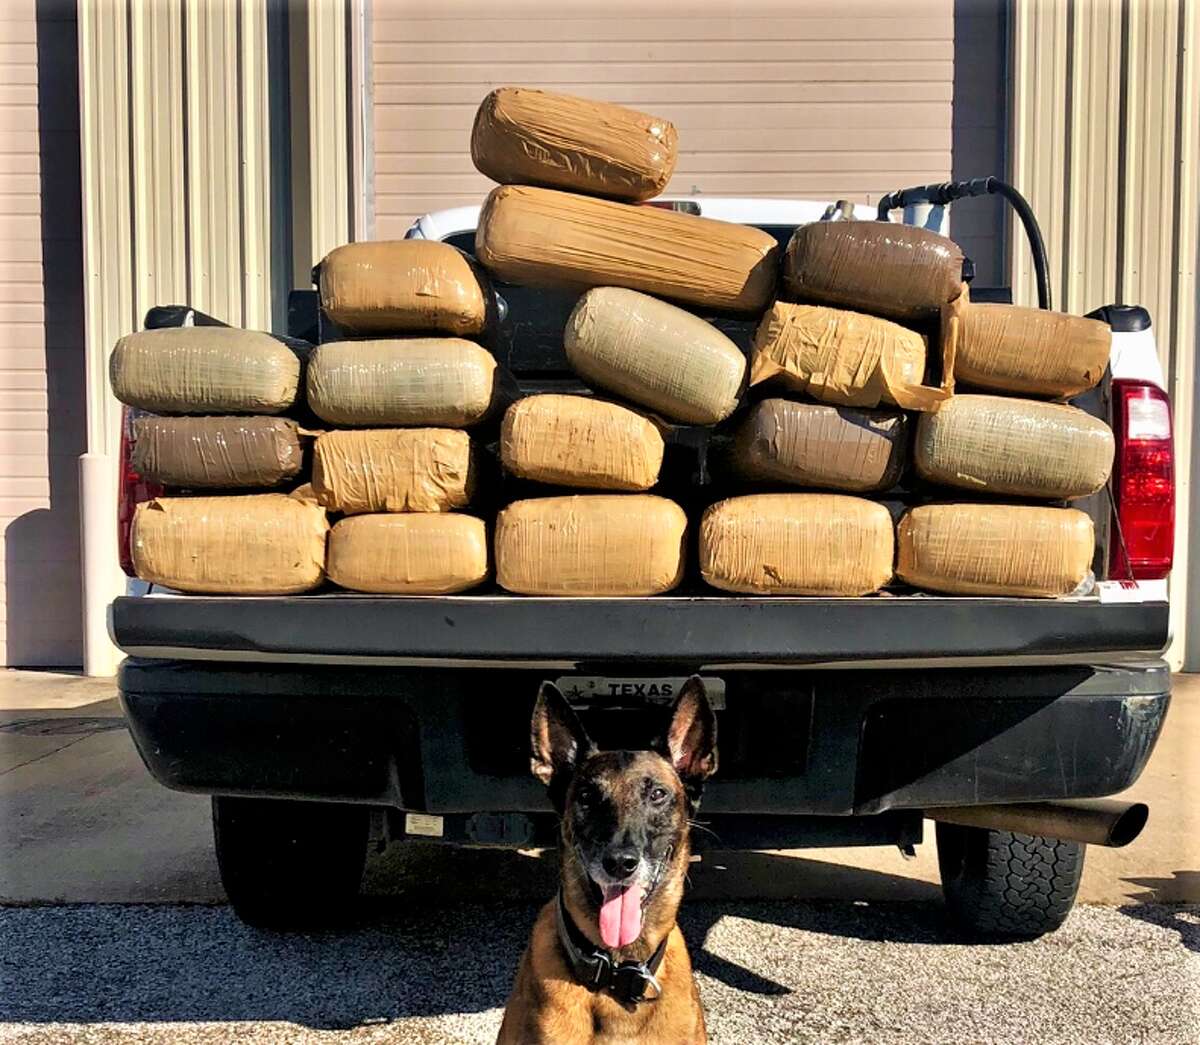 PHOTOS: Drug busts in the Houston areaDuring the traffic stop on U.S. 59 in Rosenberg Sept. 19, a task force officer and K-9 partner discovered 19 bundles of marijuana weighing approximately 202.5 pounds in an altered external fuel tank in the bed of the truck. >>>See photos of 2018 drug busts in the Houston area...